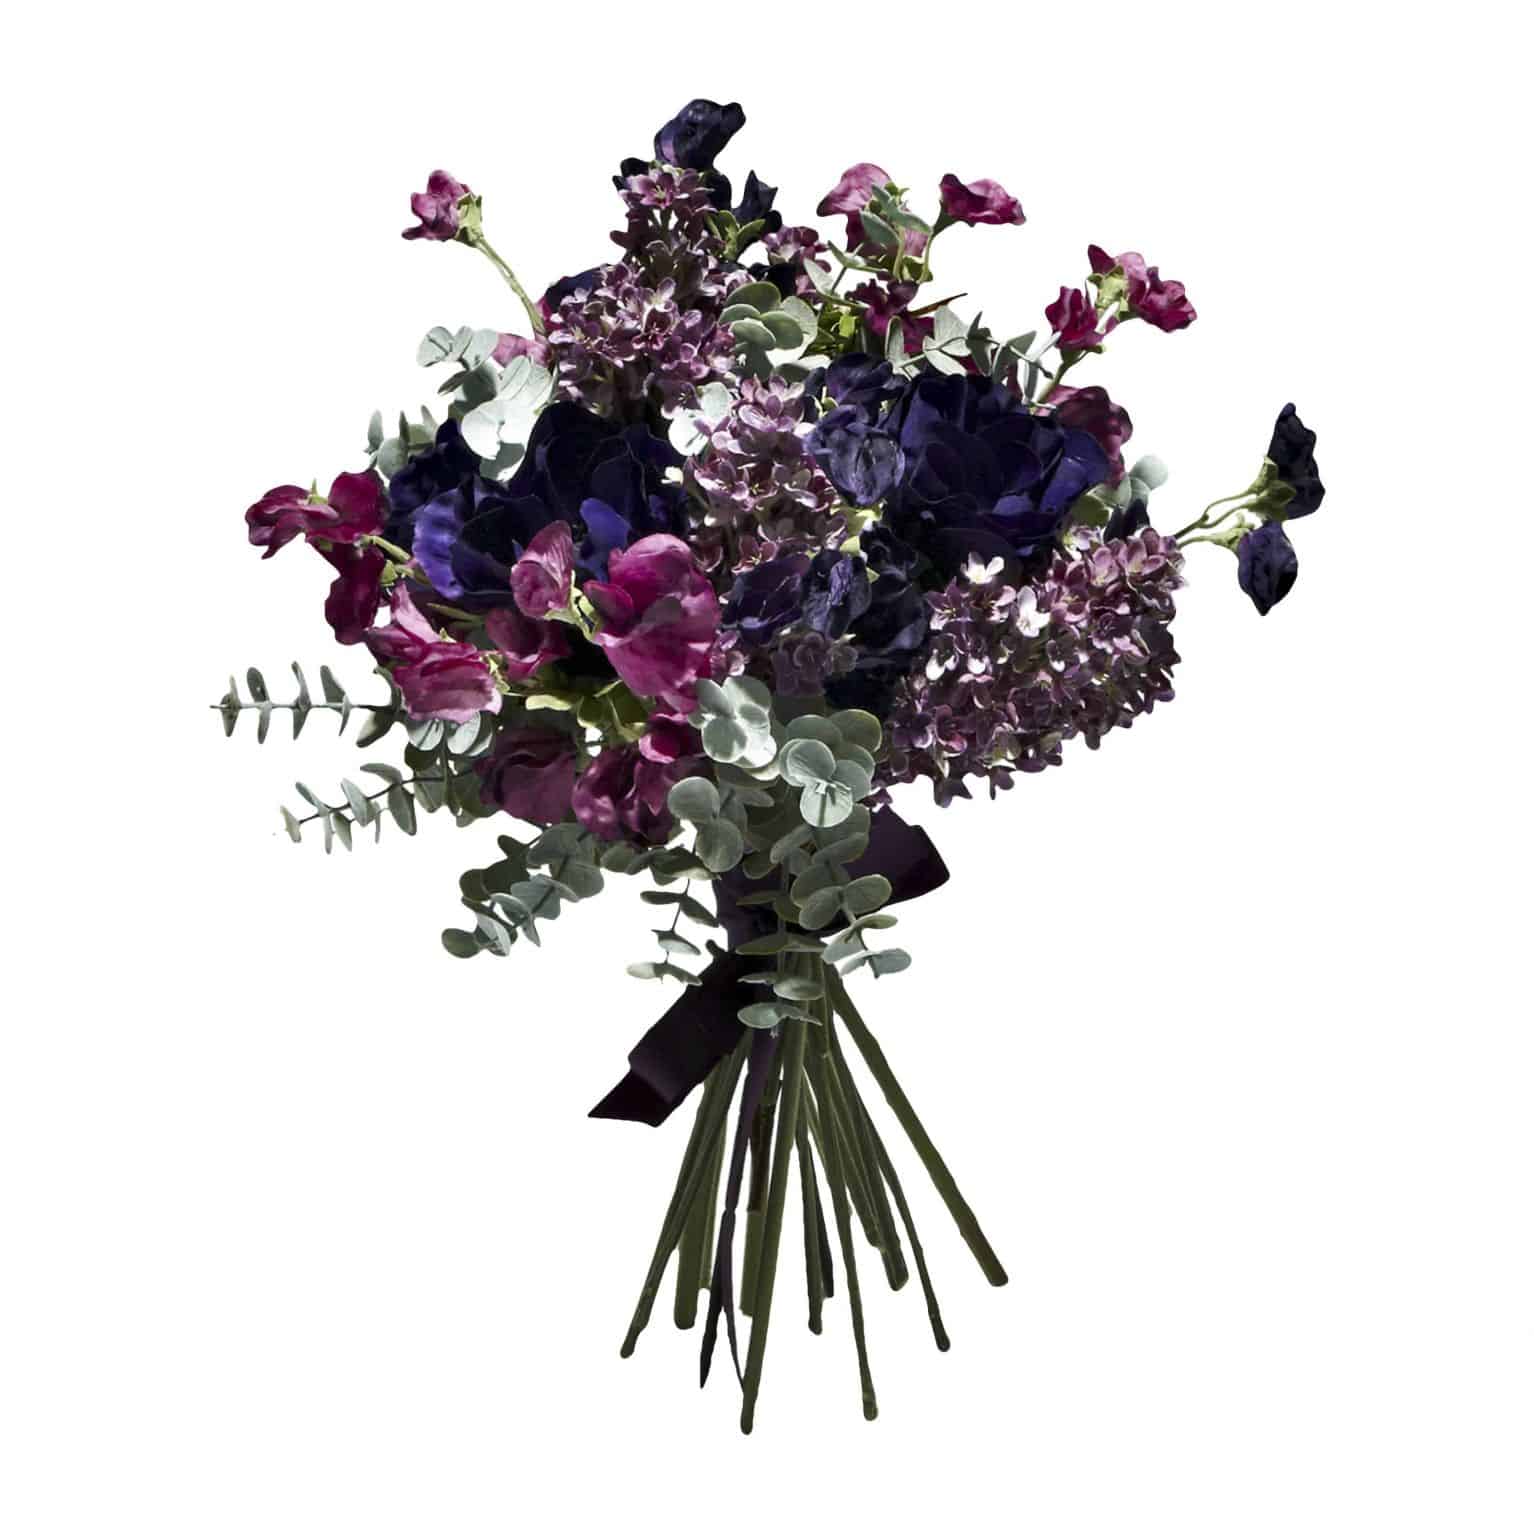 Buy & enjoy our beautiful handtied spring silk flower bouquet of artificial sweet pea in lilac lavender & purple with anemone artificial flower & eucalyptus.